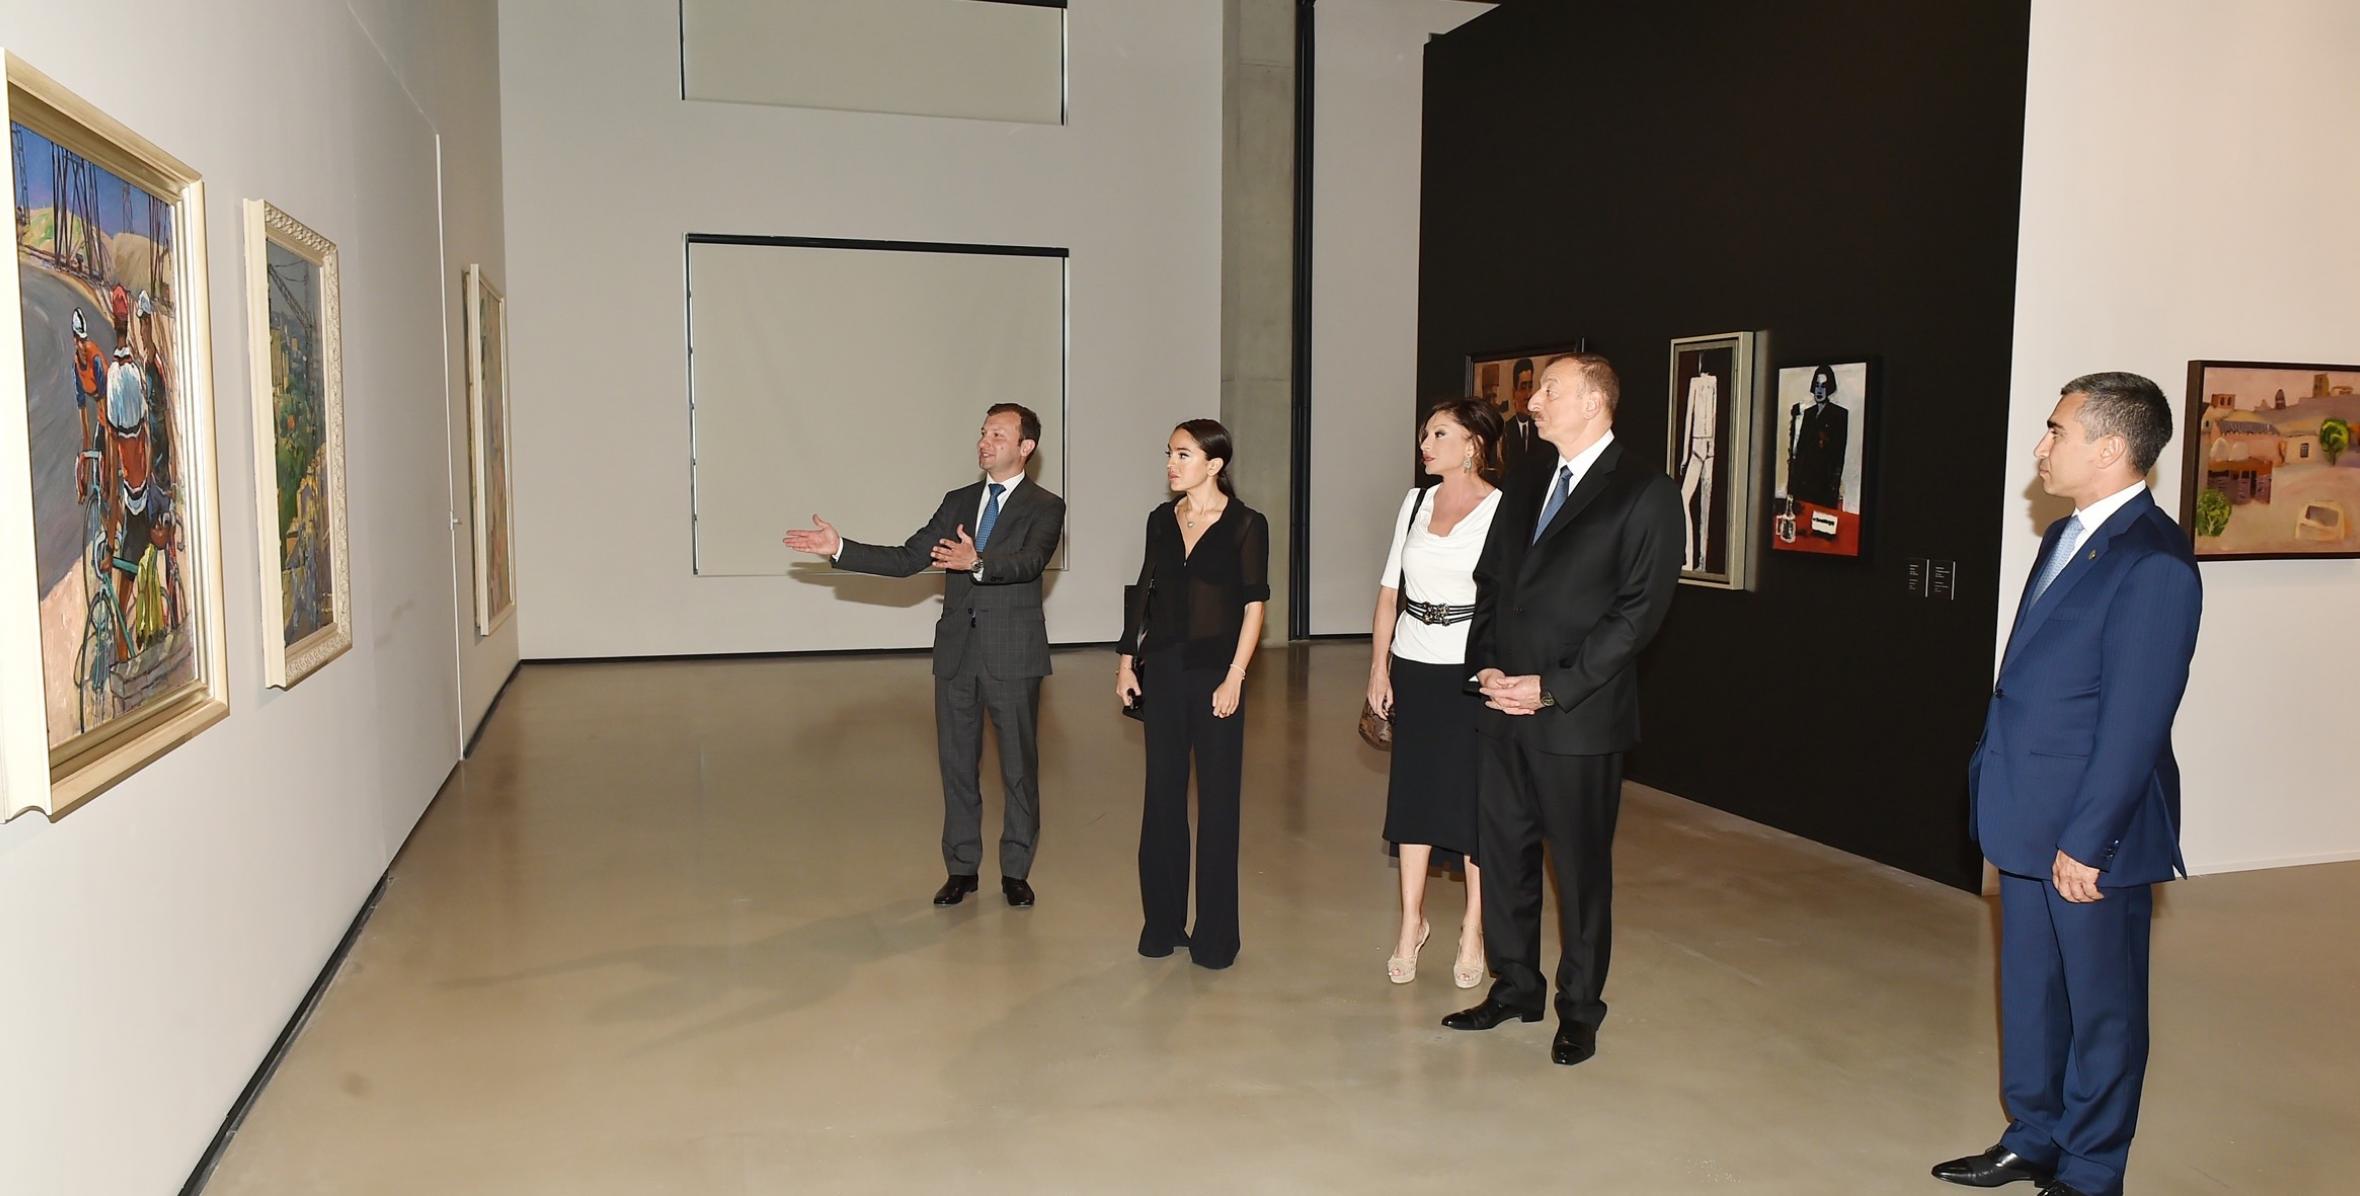 Ilham Aliyev attended the opening of “Azerbaijani painting in the 20th-21st centuries” exhibition